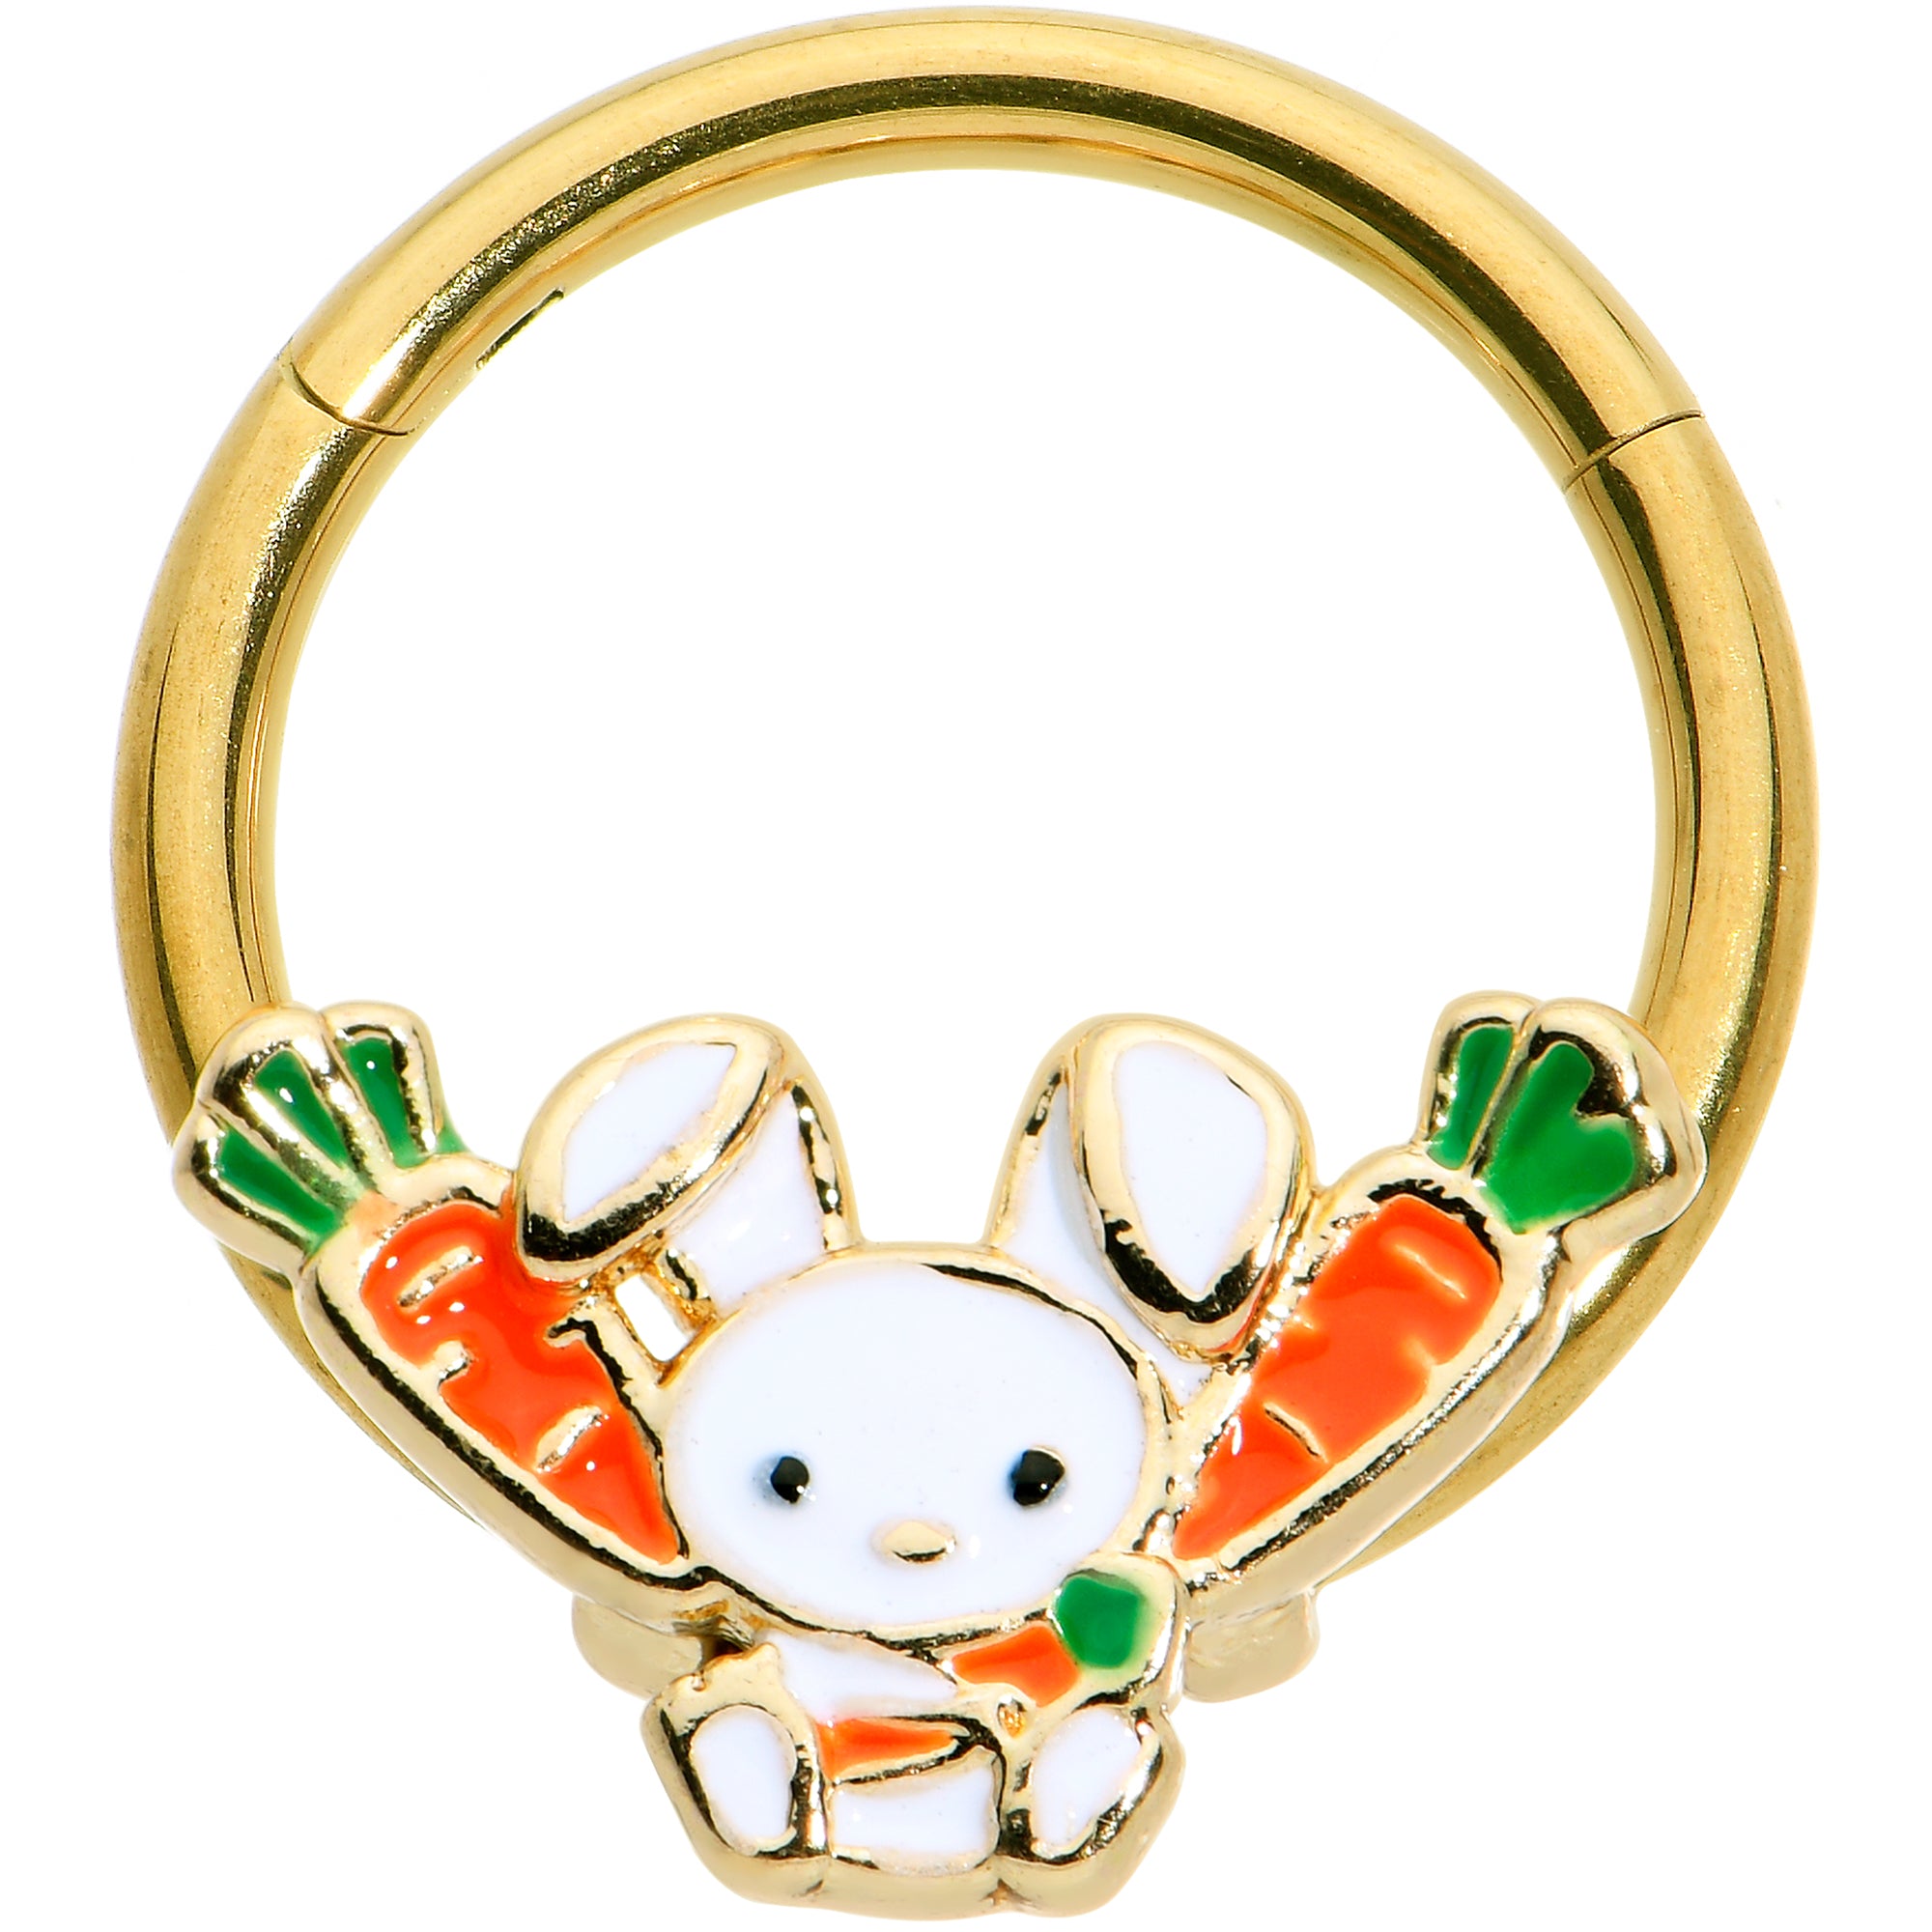 Image of 16 Gauge 3/8 Gold Tone Cutie Easter Bunny Hinged Segment Ring